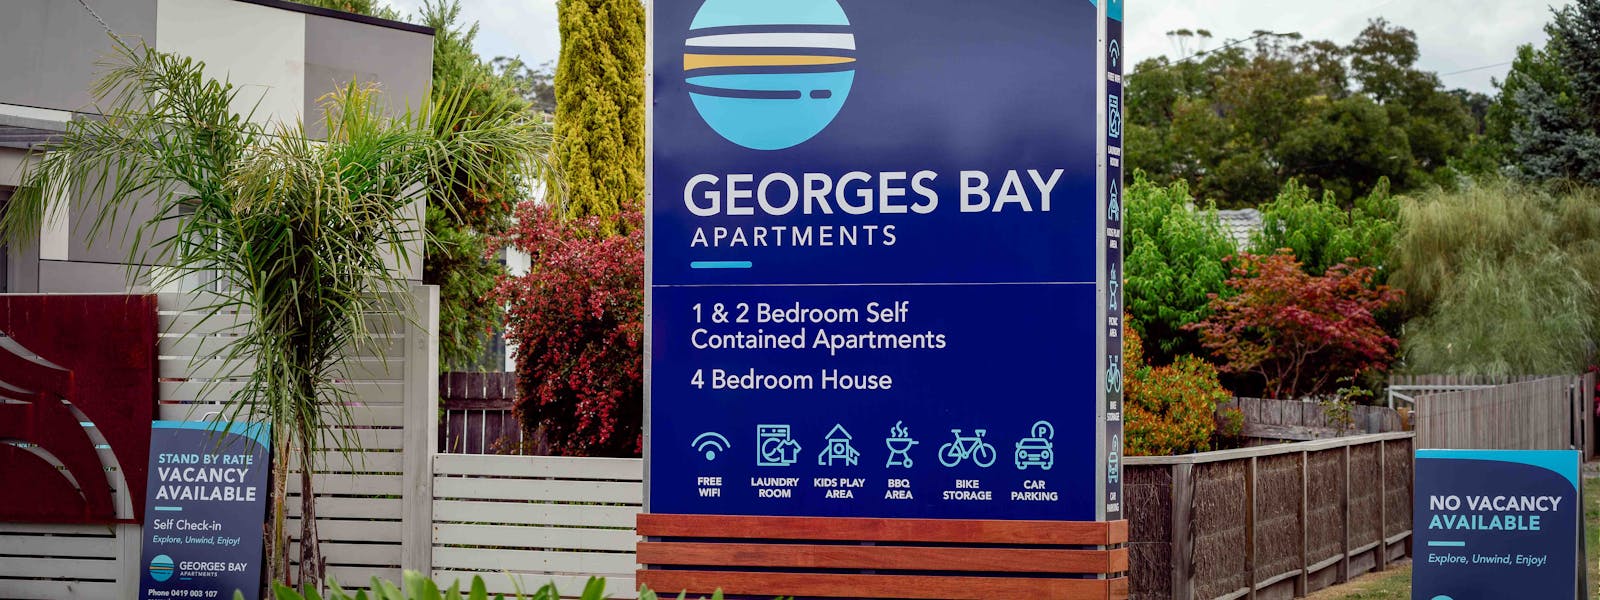 Welcome to Georges Bay Apartments.